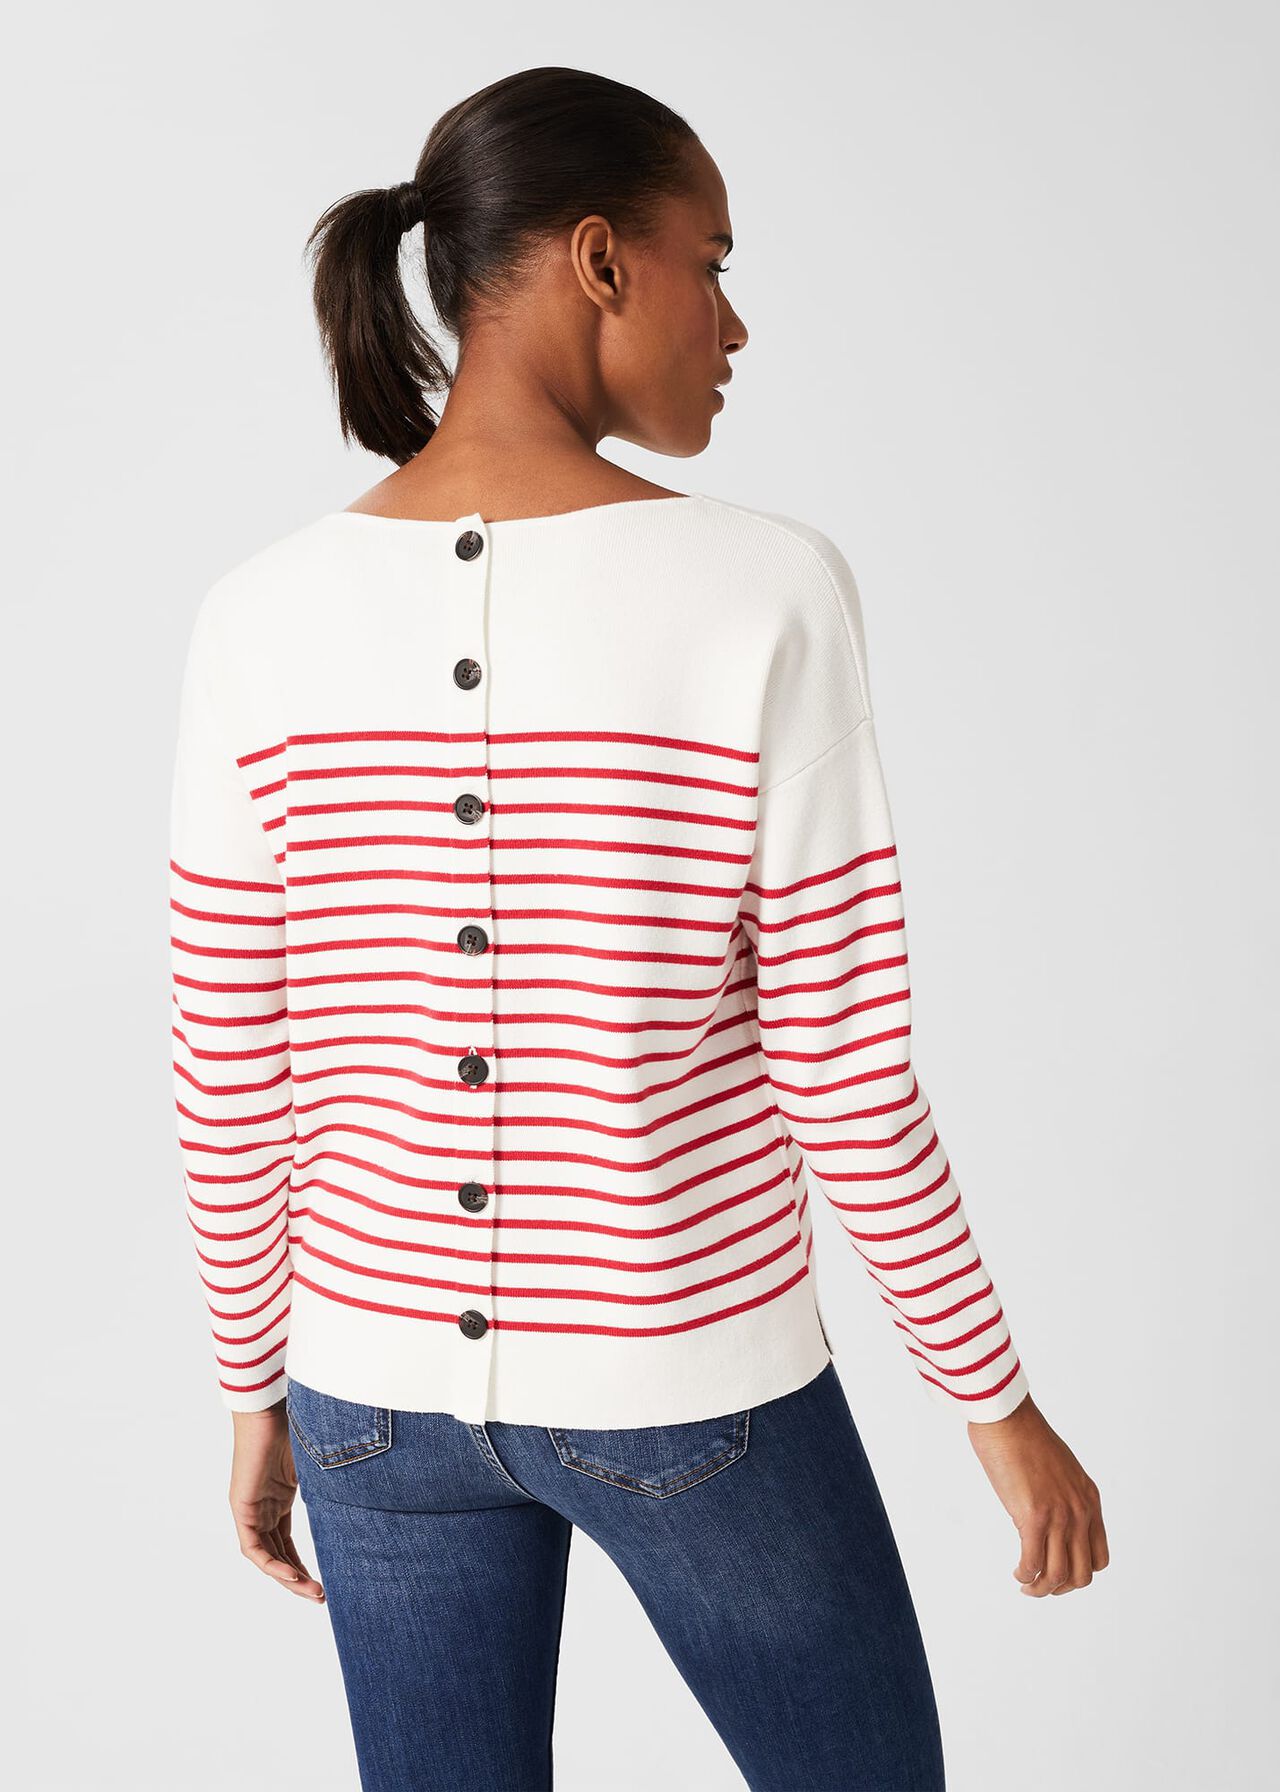 Petra Striped Sweater, Ivory Red, hi-res